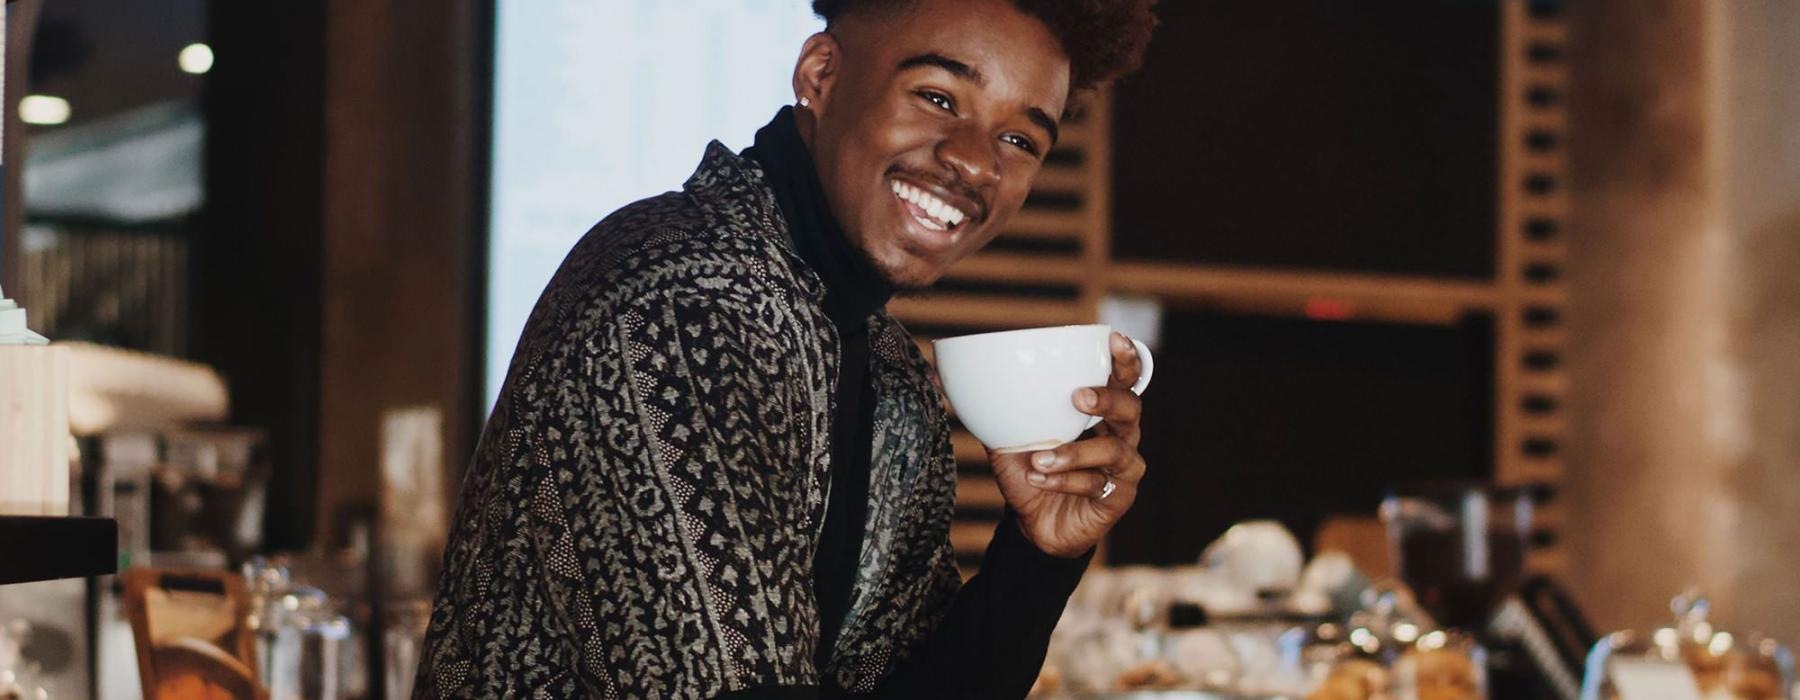 young man smiles while holding a cup of coffee in coffee shop